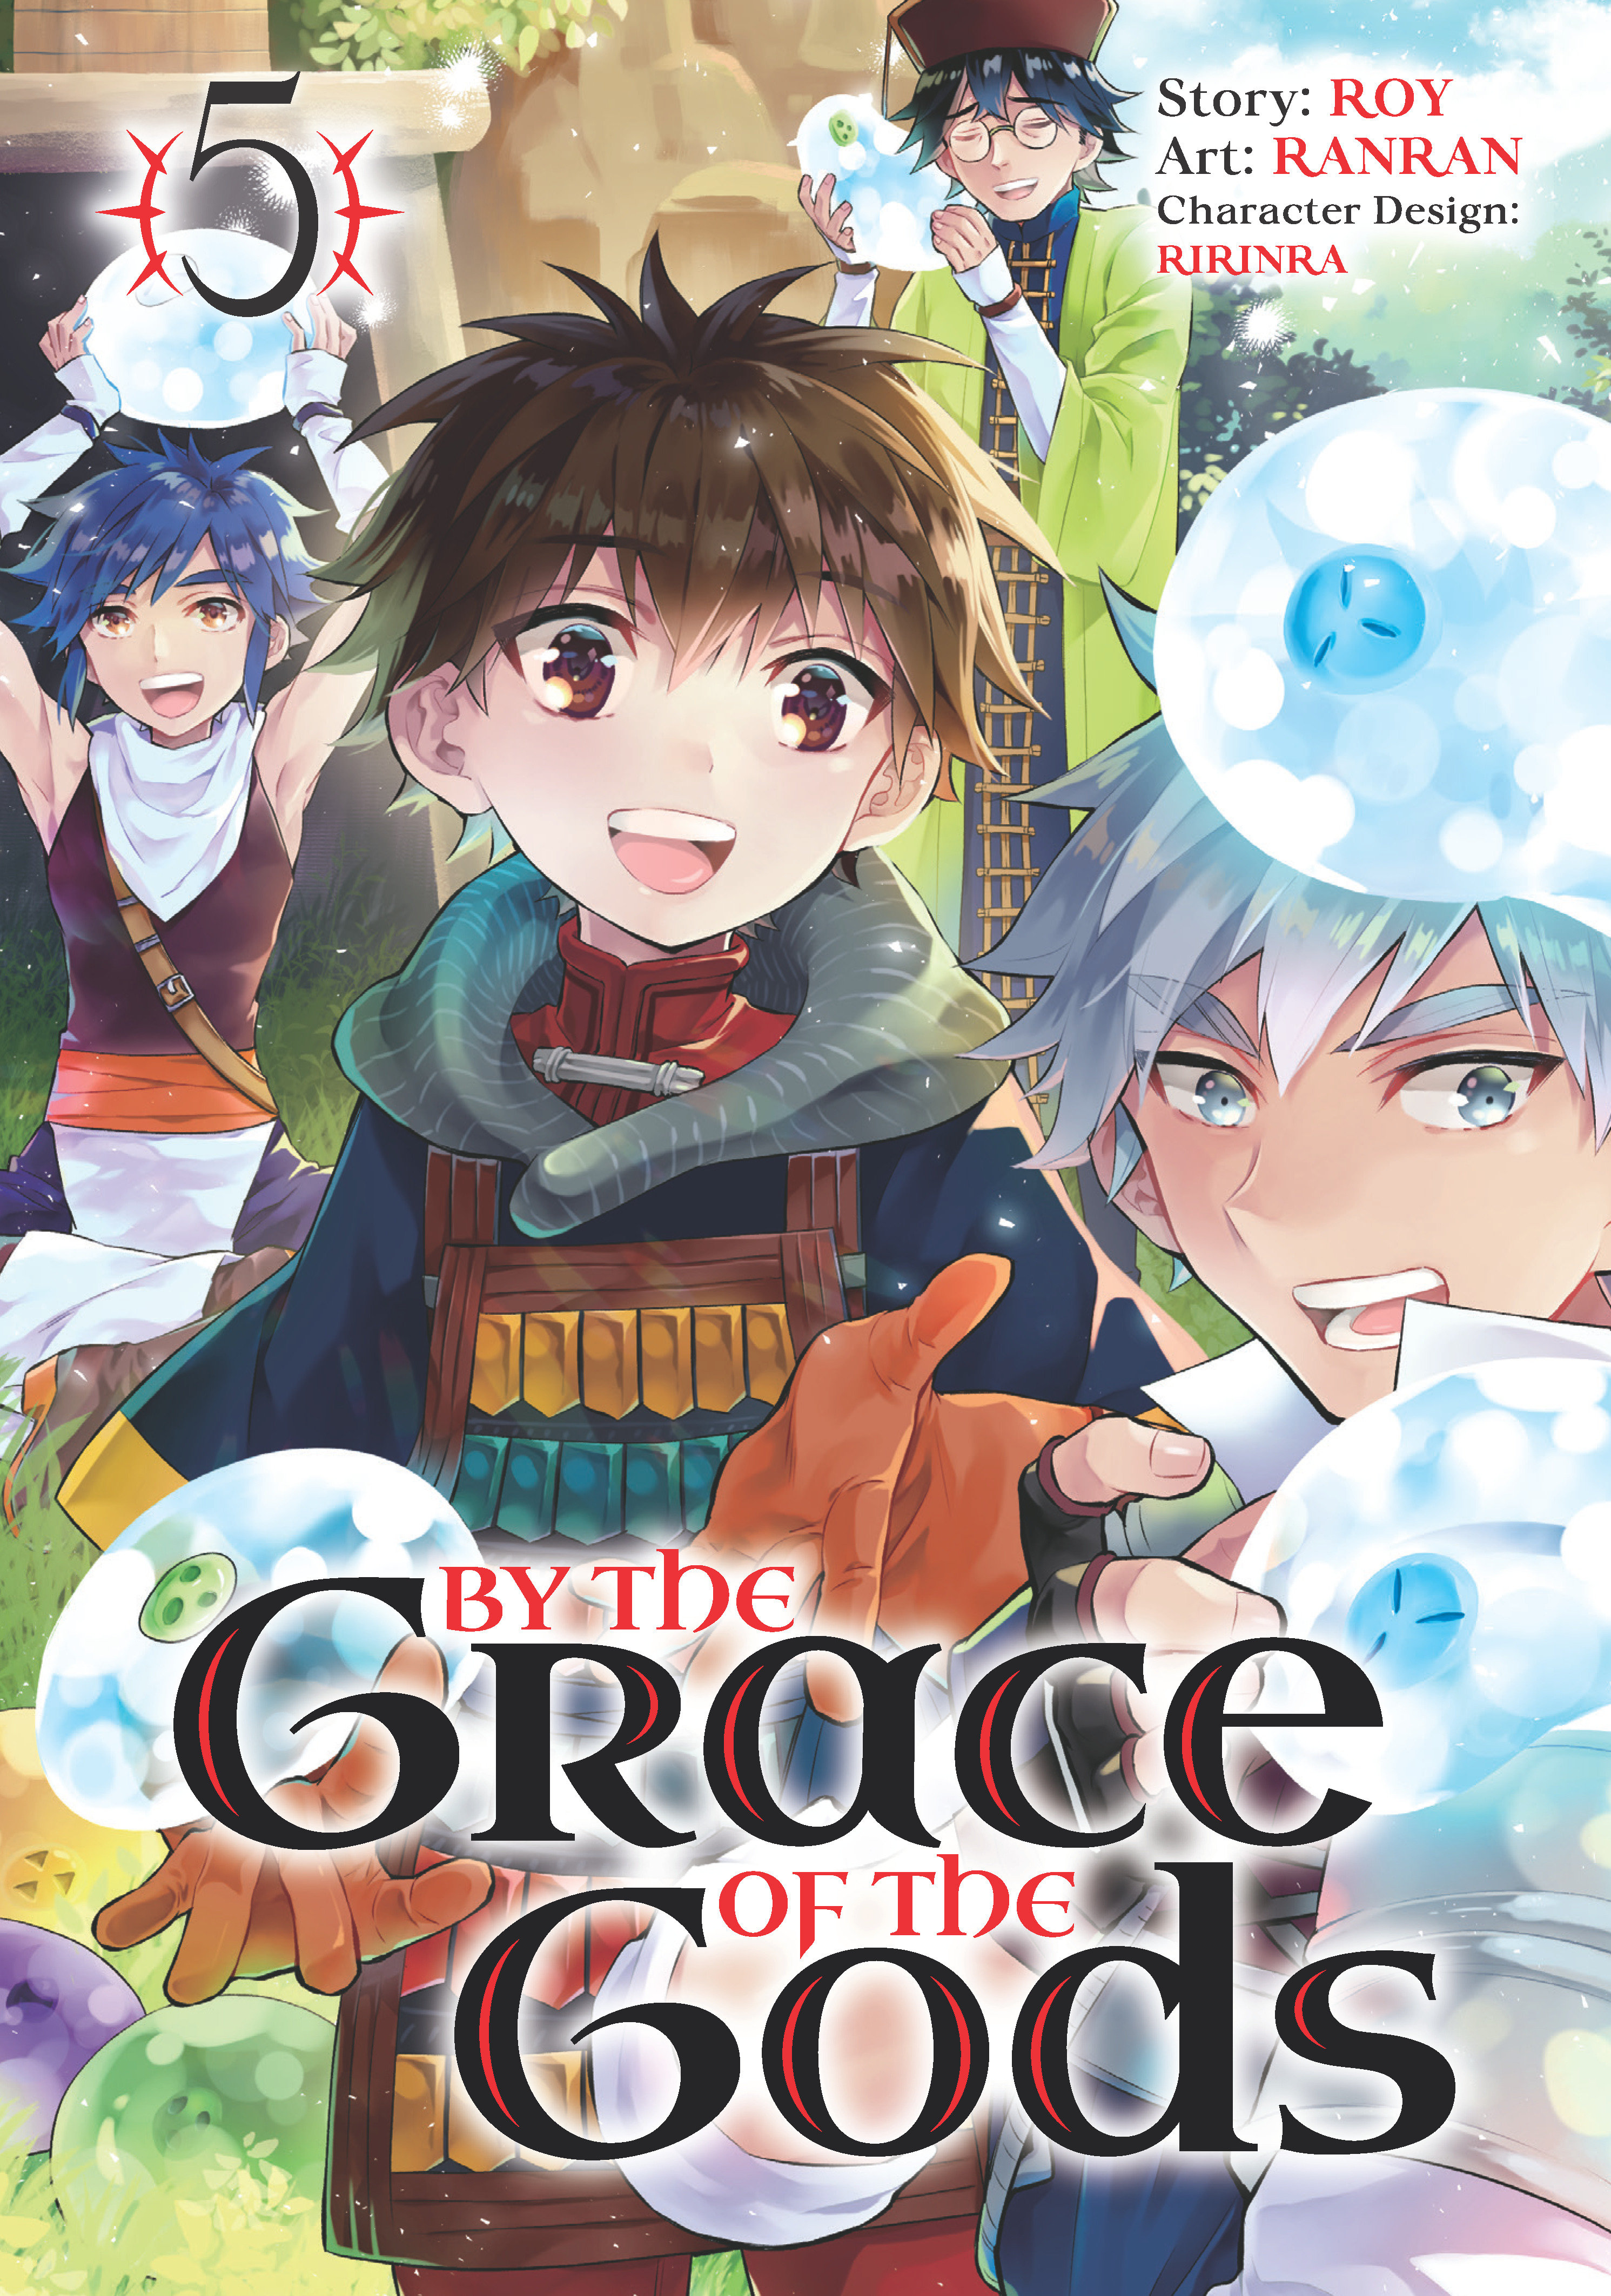 By the Grace of the Gods Manga Volume 5